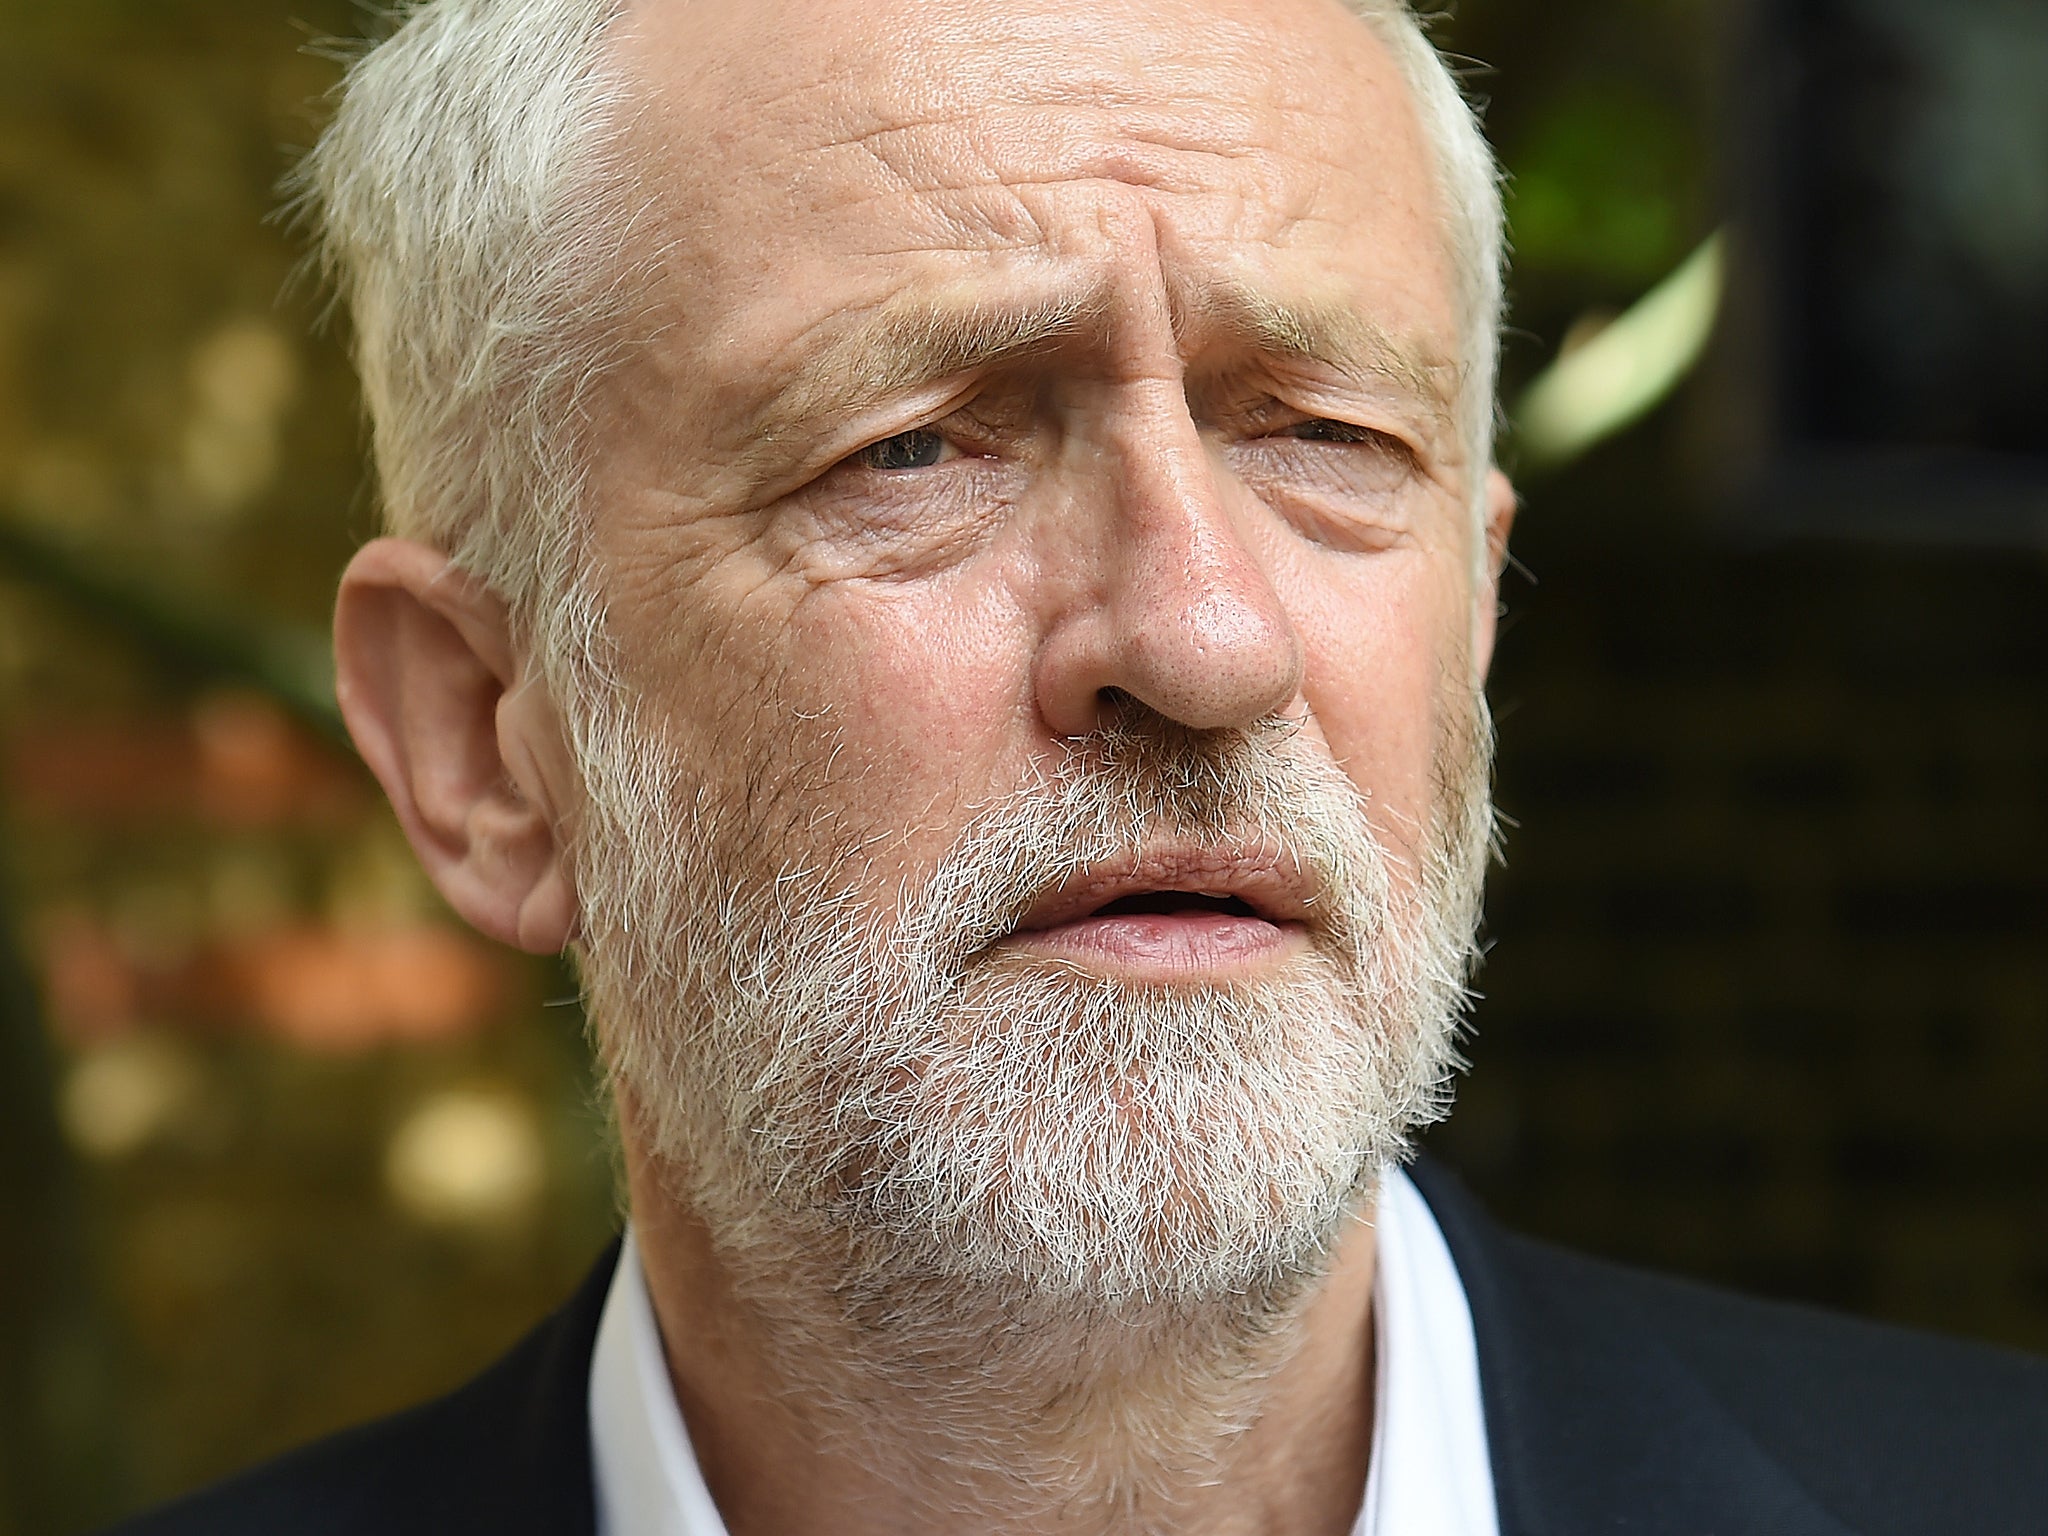 Jeremy Corbyn repeated his call to requisition empty properties